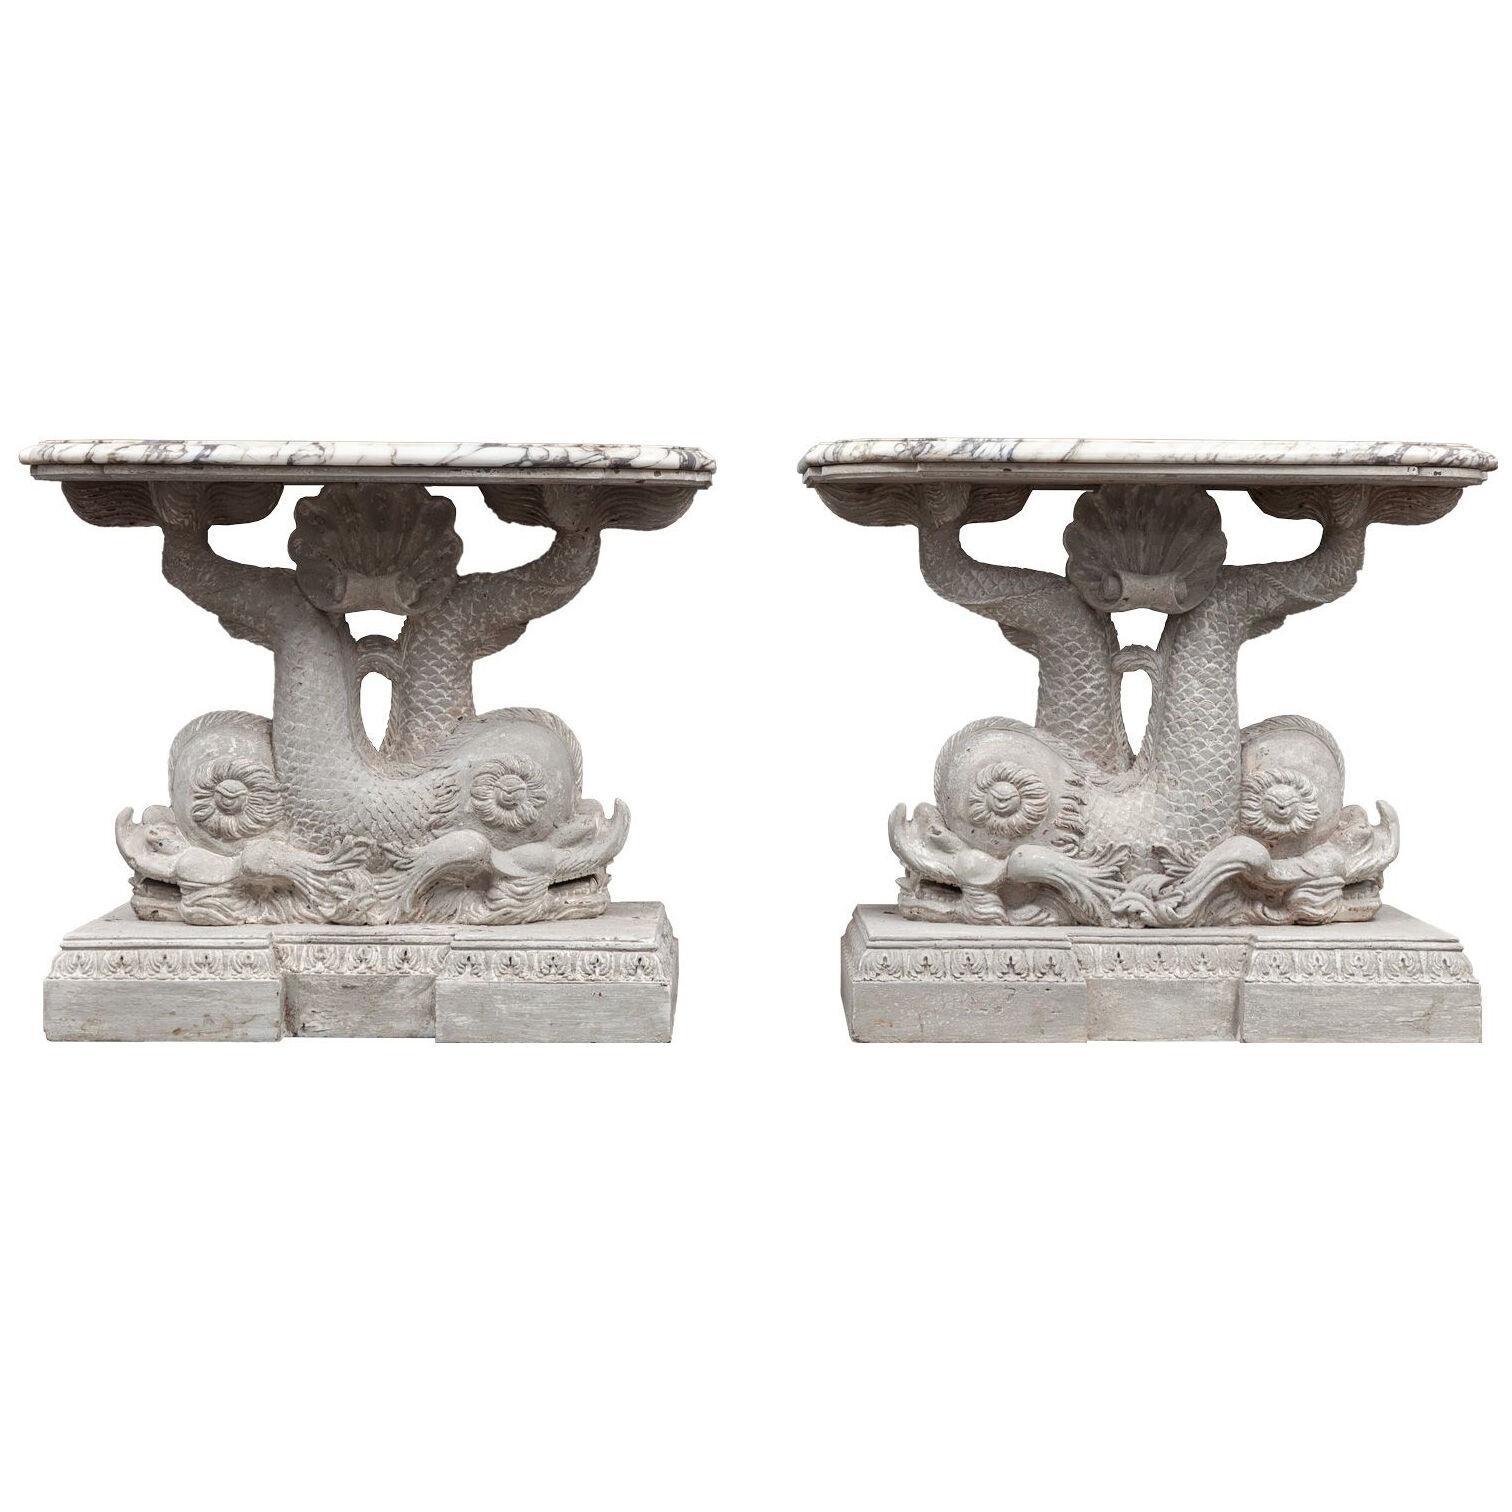 Antique Pair of Carved Wooden Dolphin Tables with Marble Tops